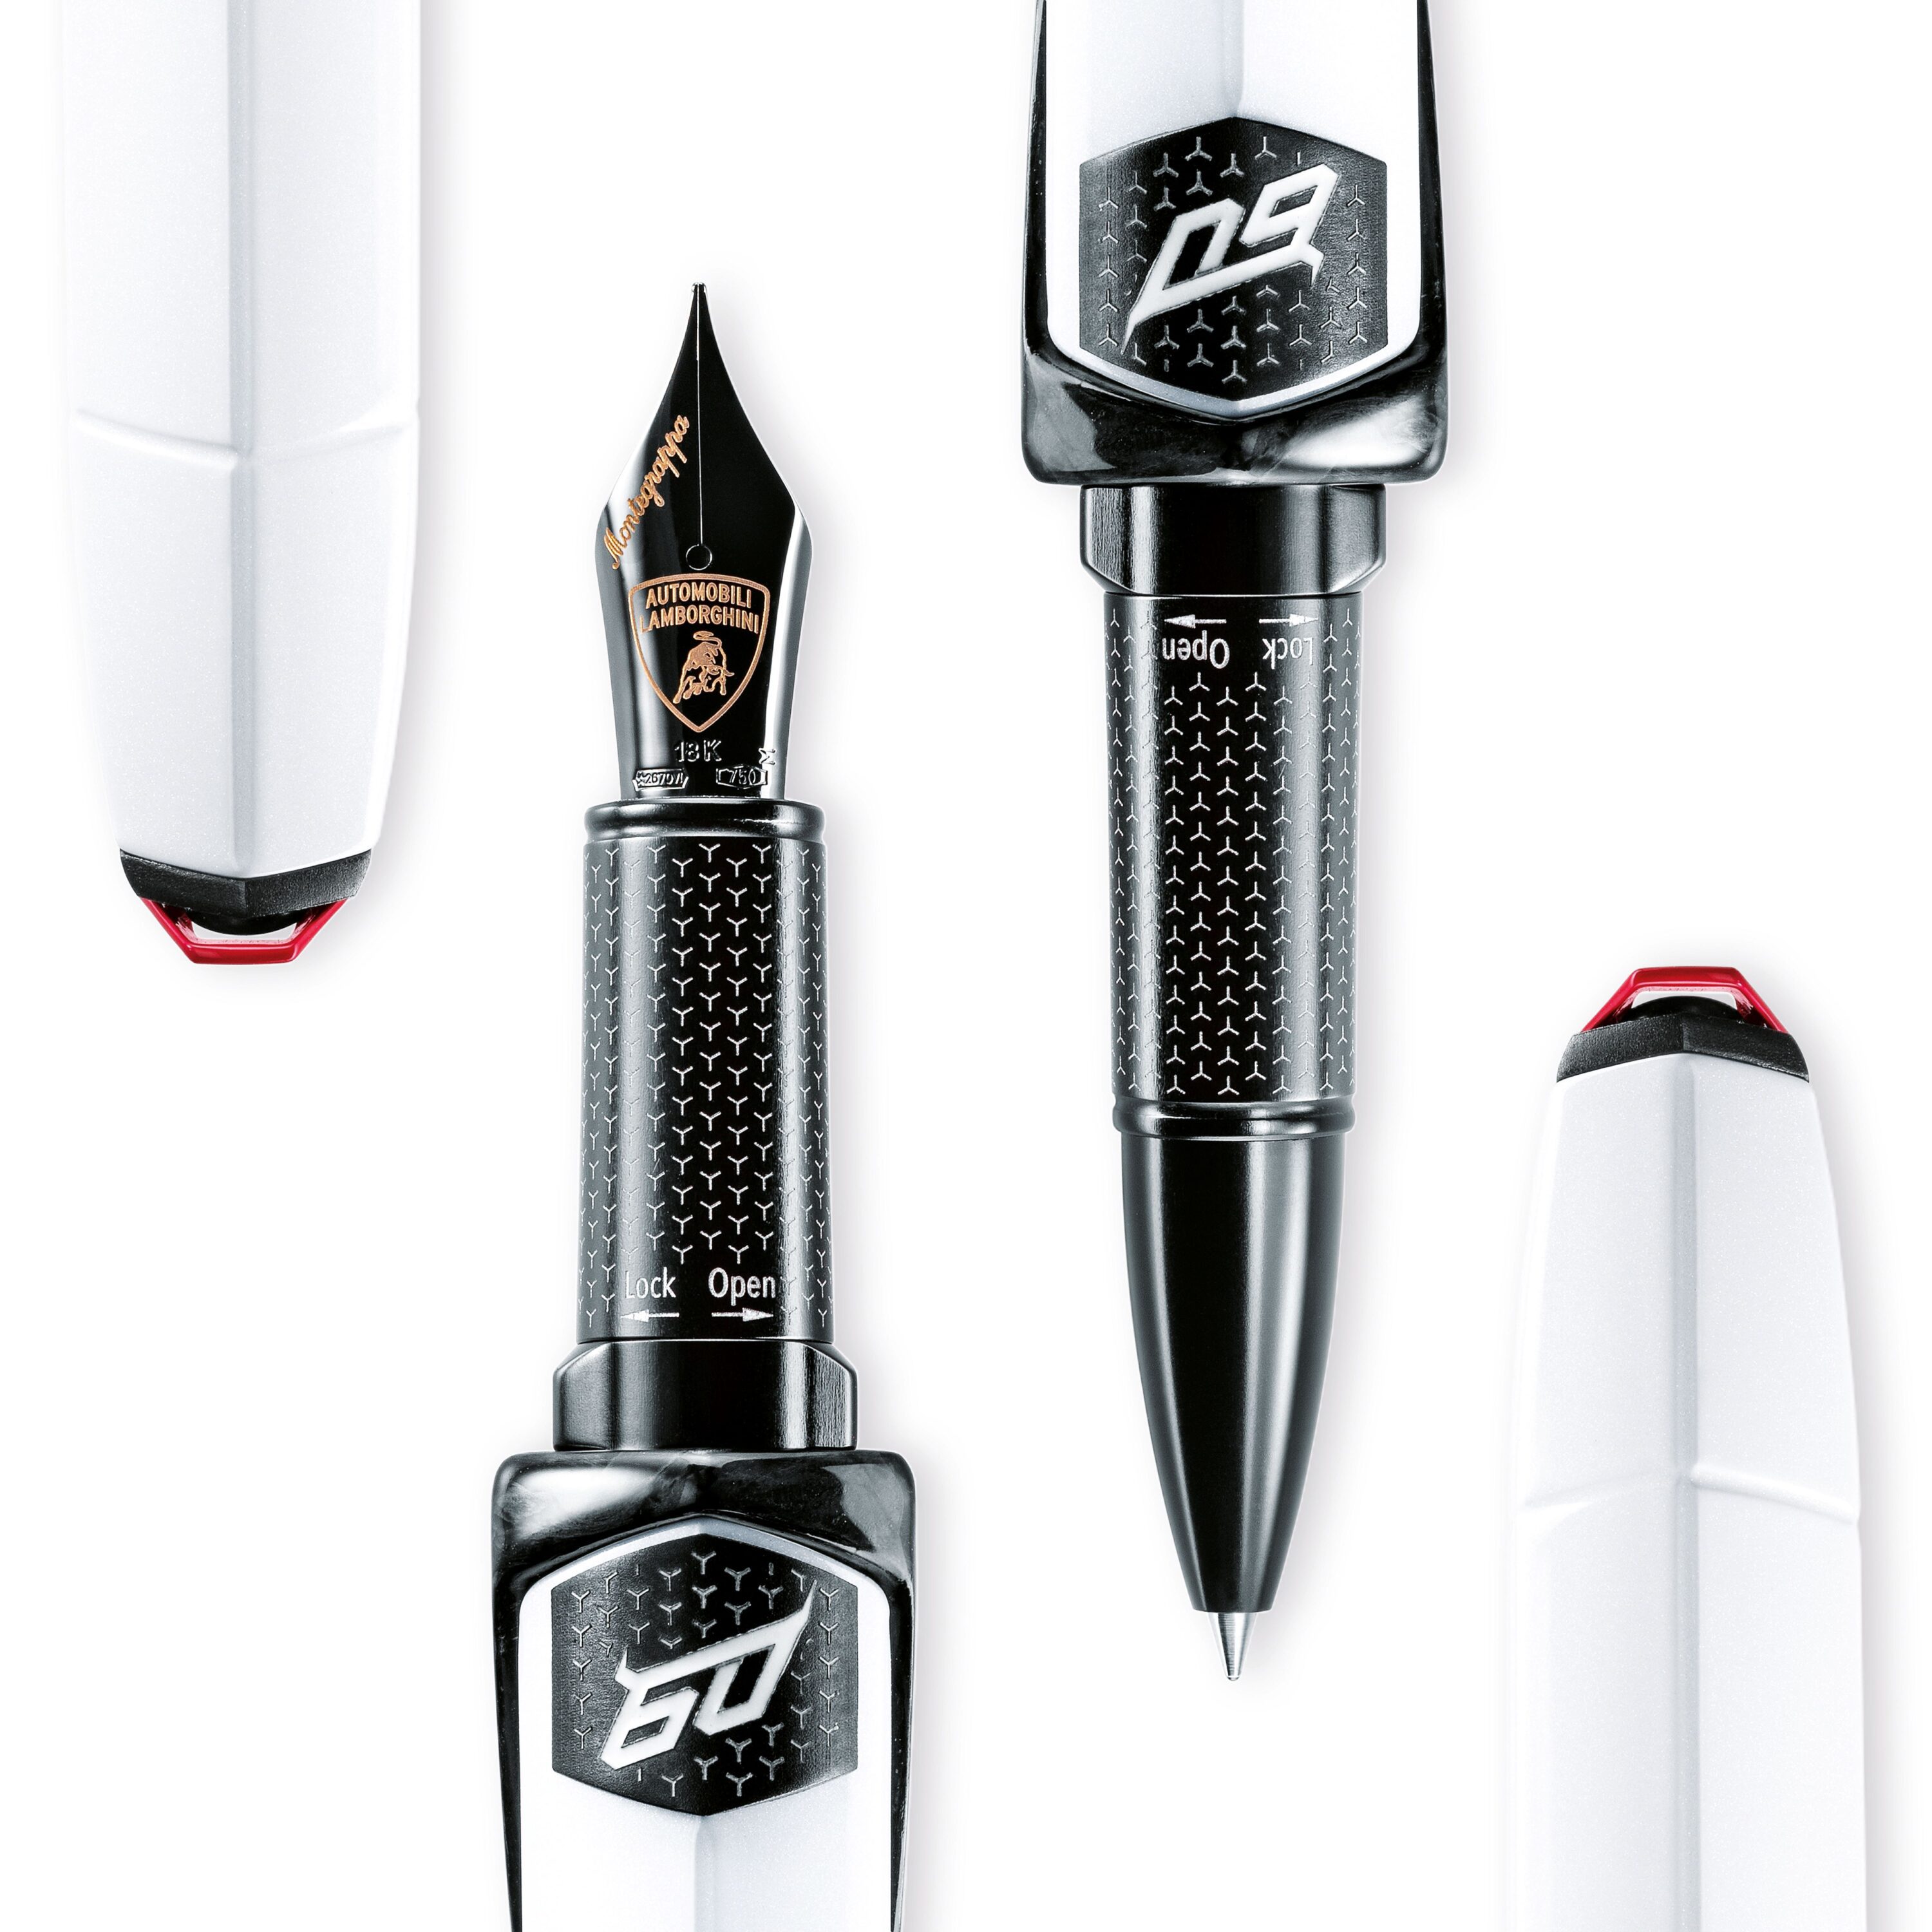 A promotional photo of a fountain pen and rollerball pen as part of the Lamborghini x Montegrappa special collection